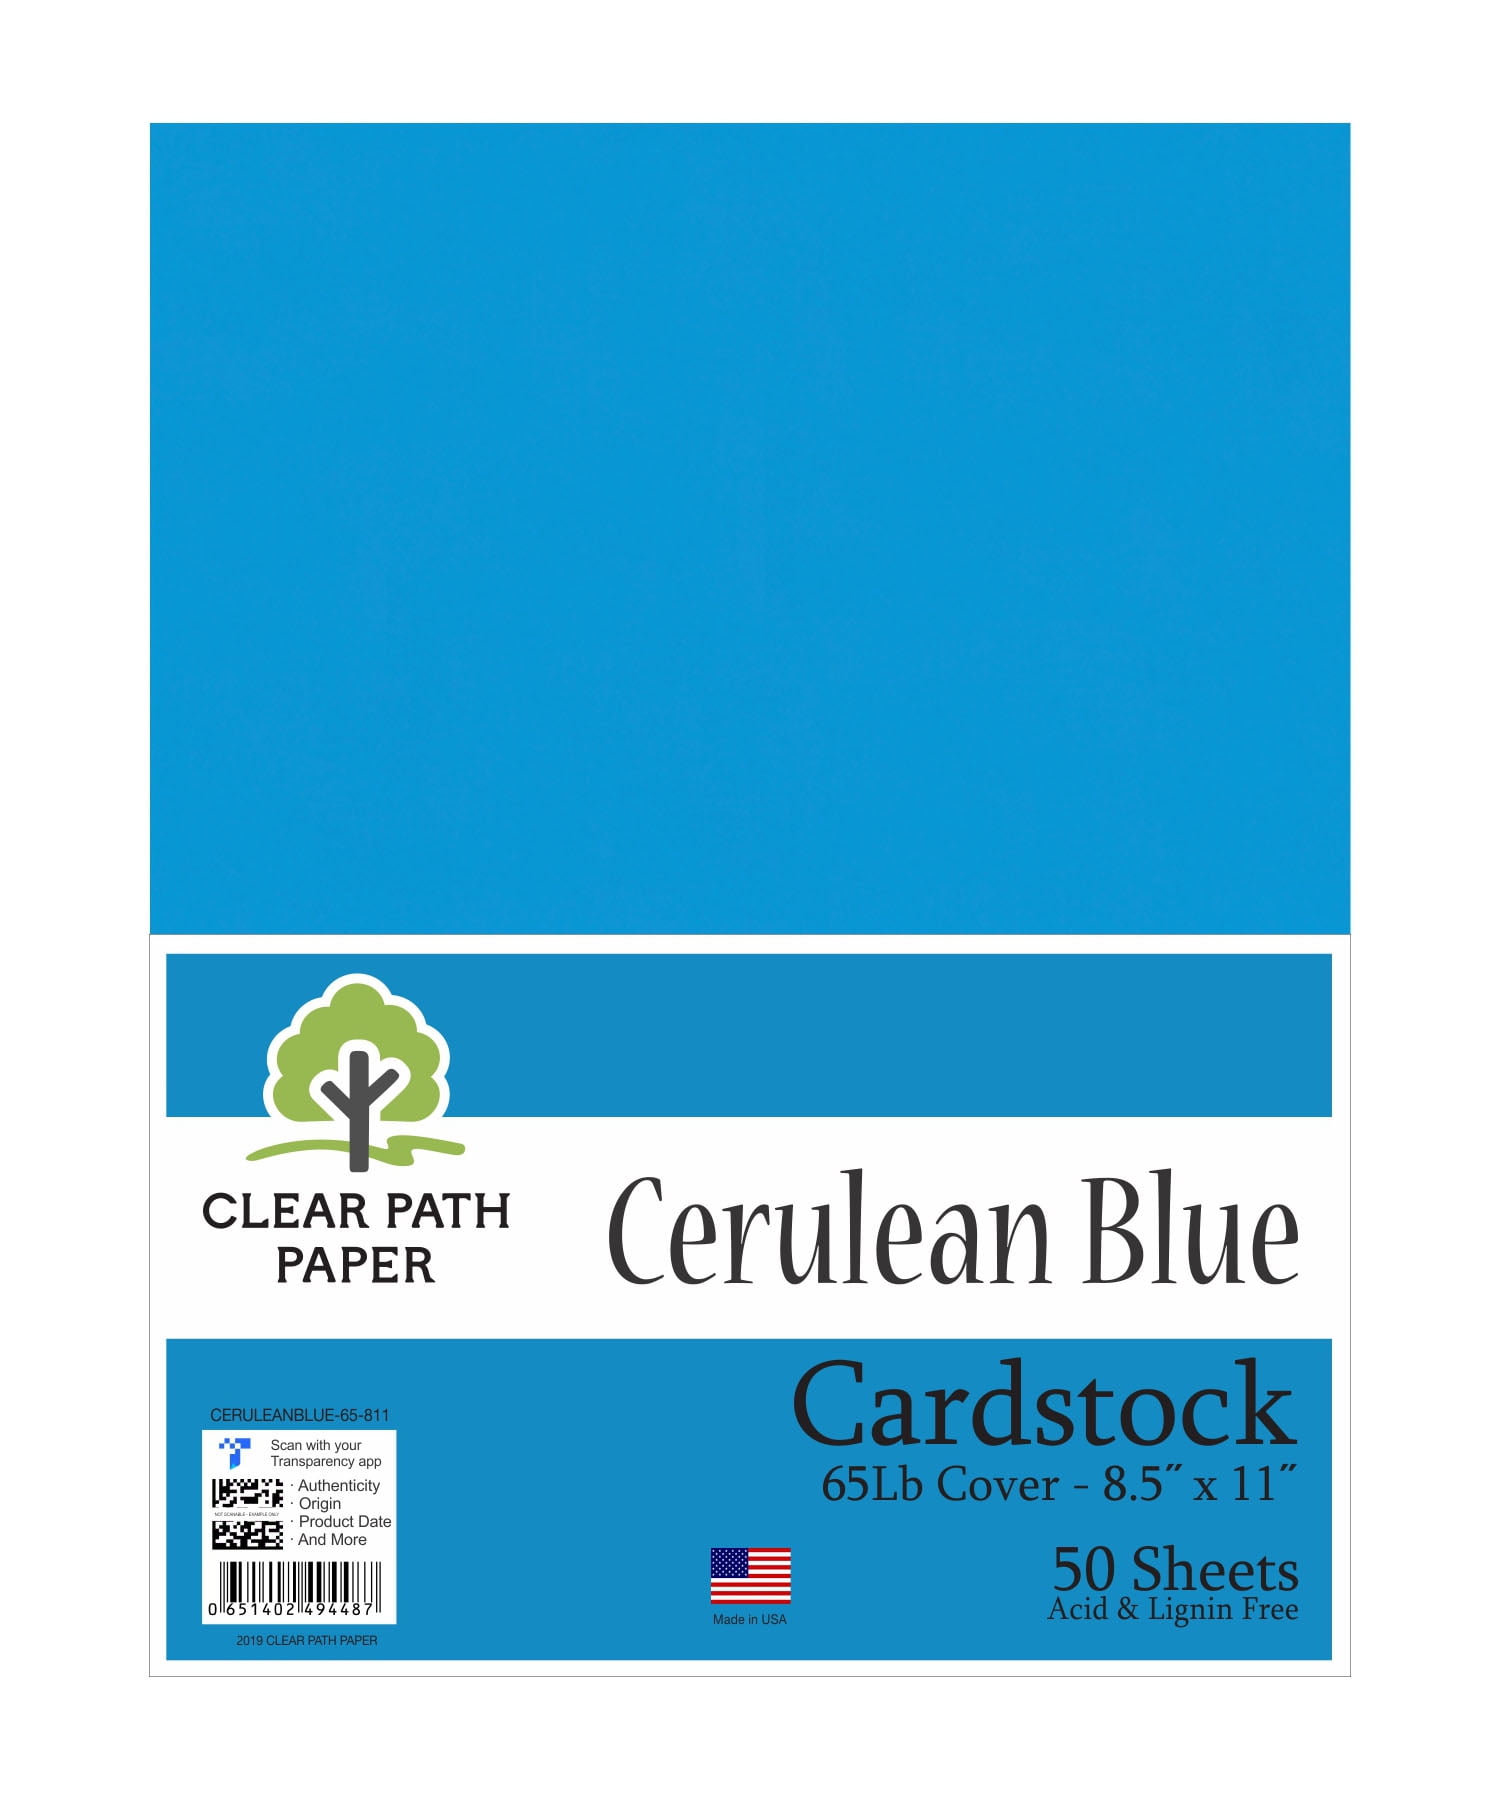 Black Cardstock - 8.5 x 11 inch - 65Lb Cover - 50 Sheets - Clear Path Paper  